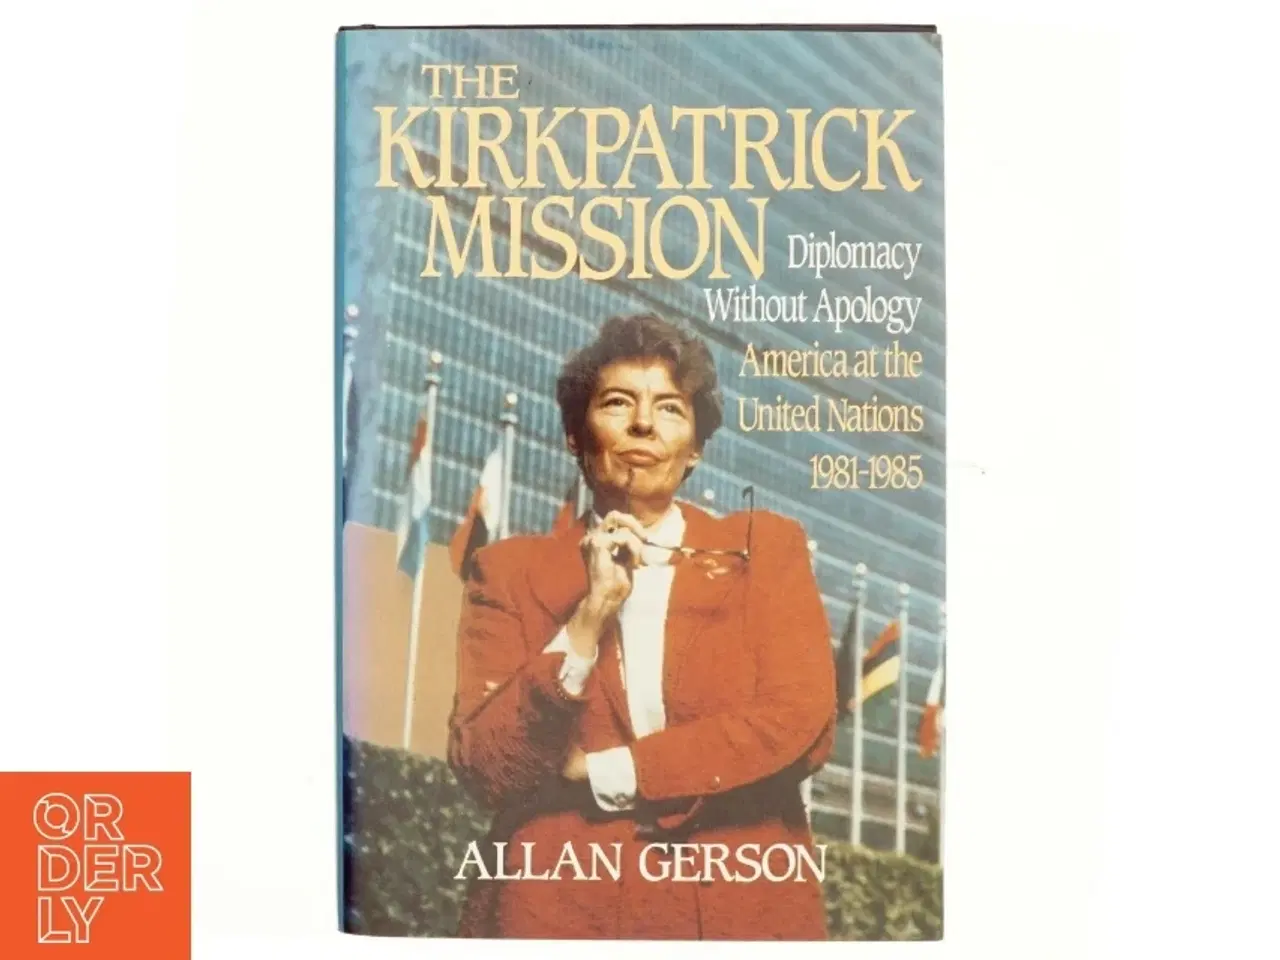 Billede 1 - Kirkpatrick Mission (Diplomacy Wo Apology Ame at the United Nations 1981 to 85 af Gerson (Bog)